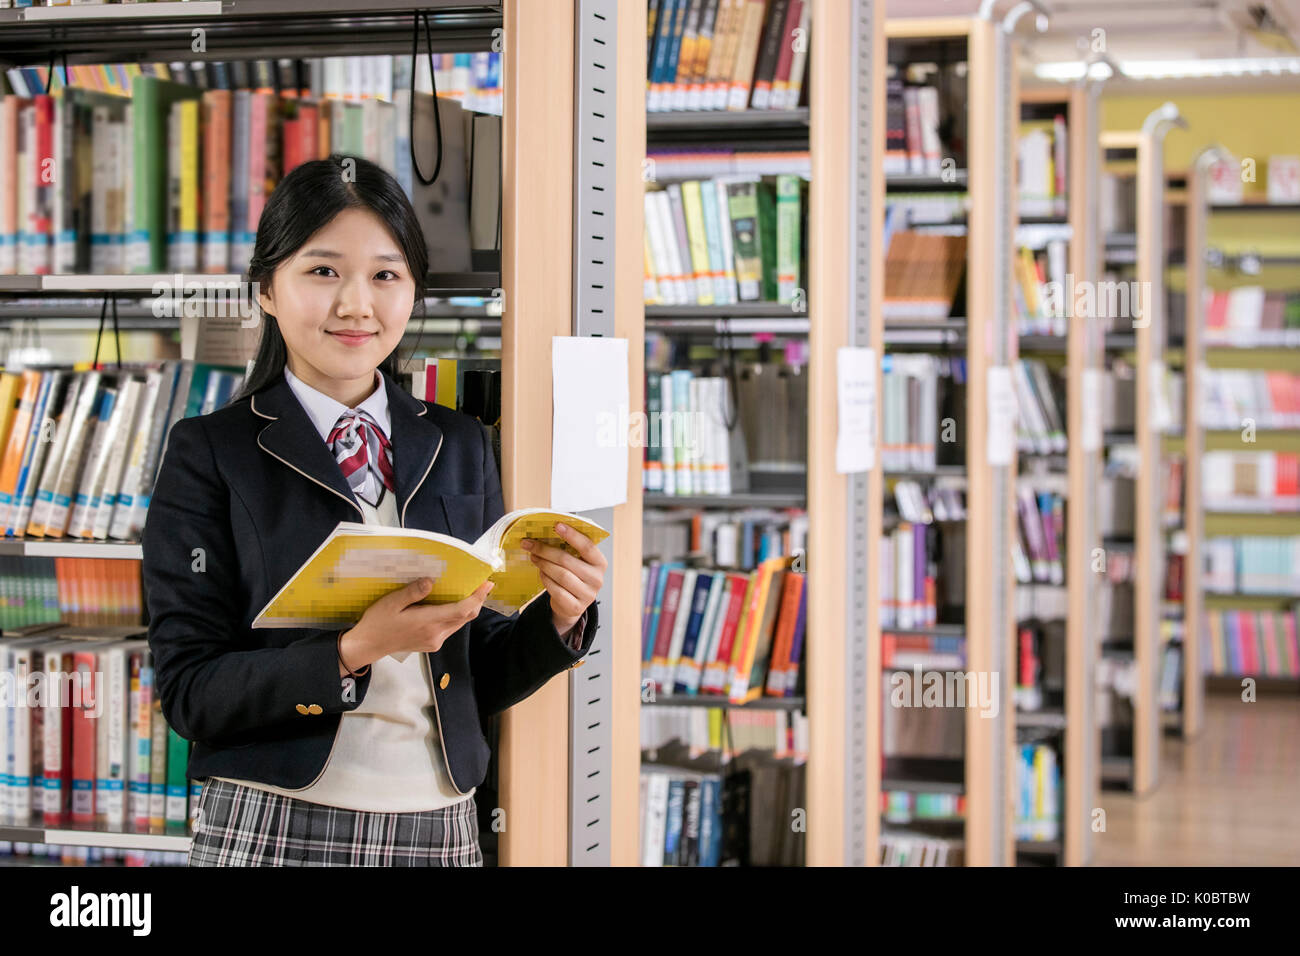 School girl Smiling with book in library Banque D'Images